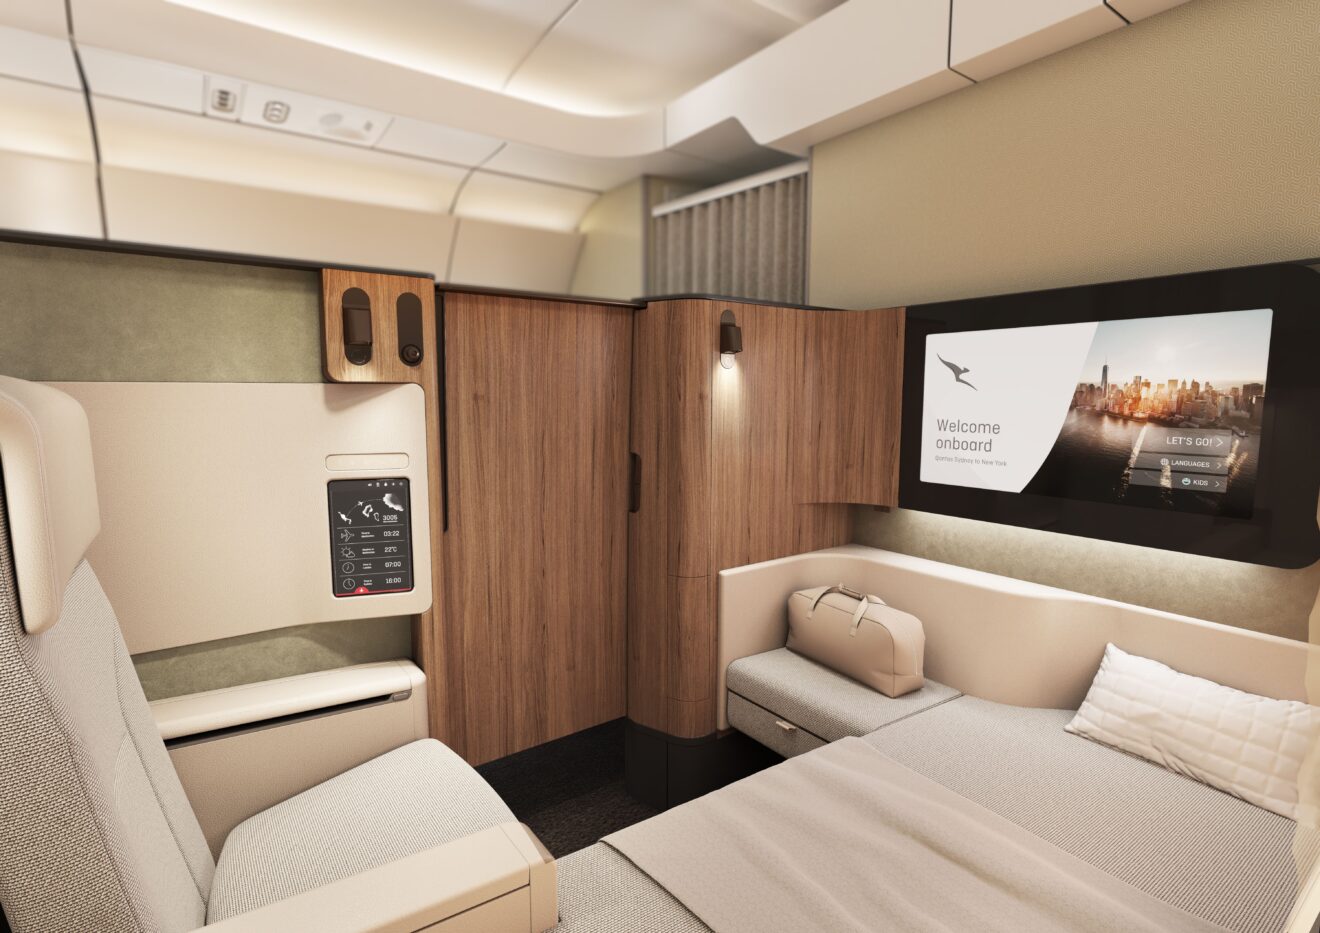 First Suite in Qantas' new, special designed Airbus A350 aircraft